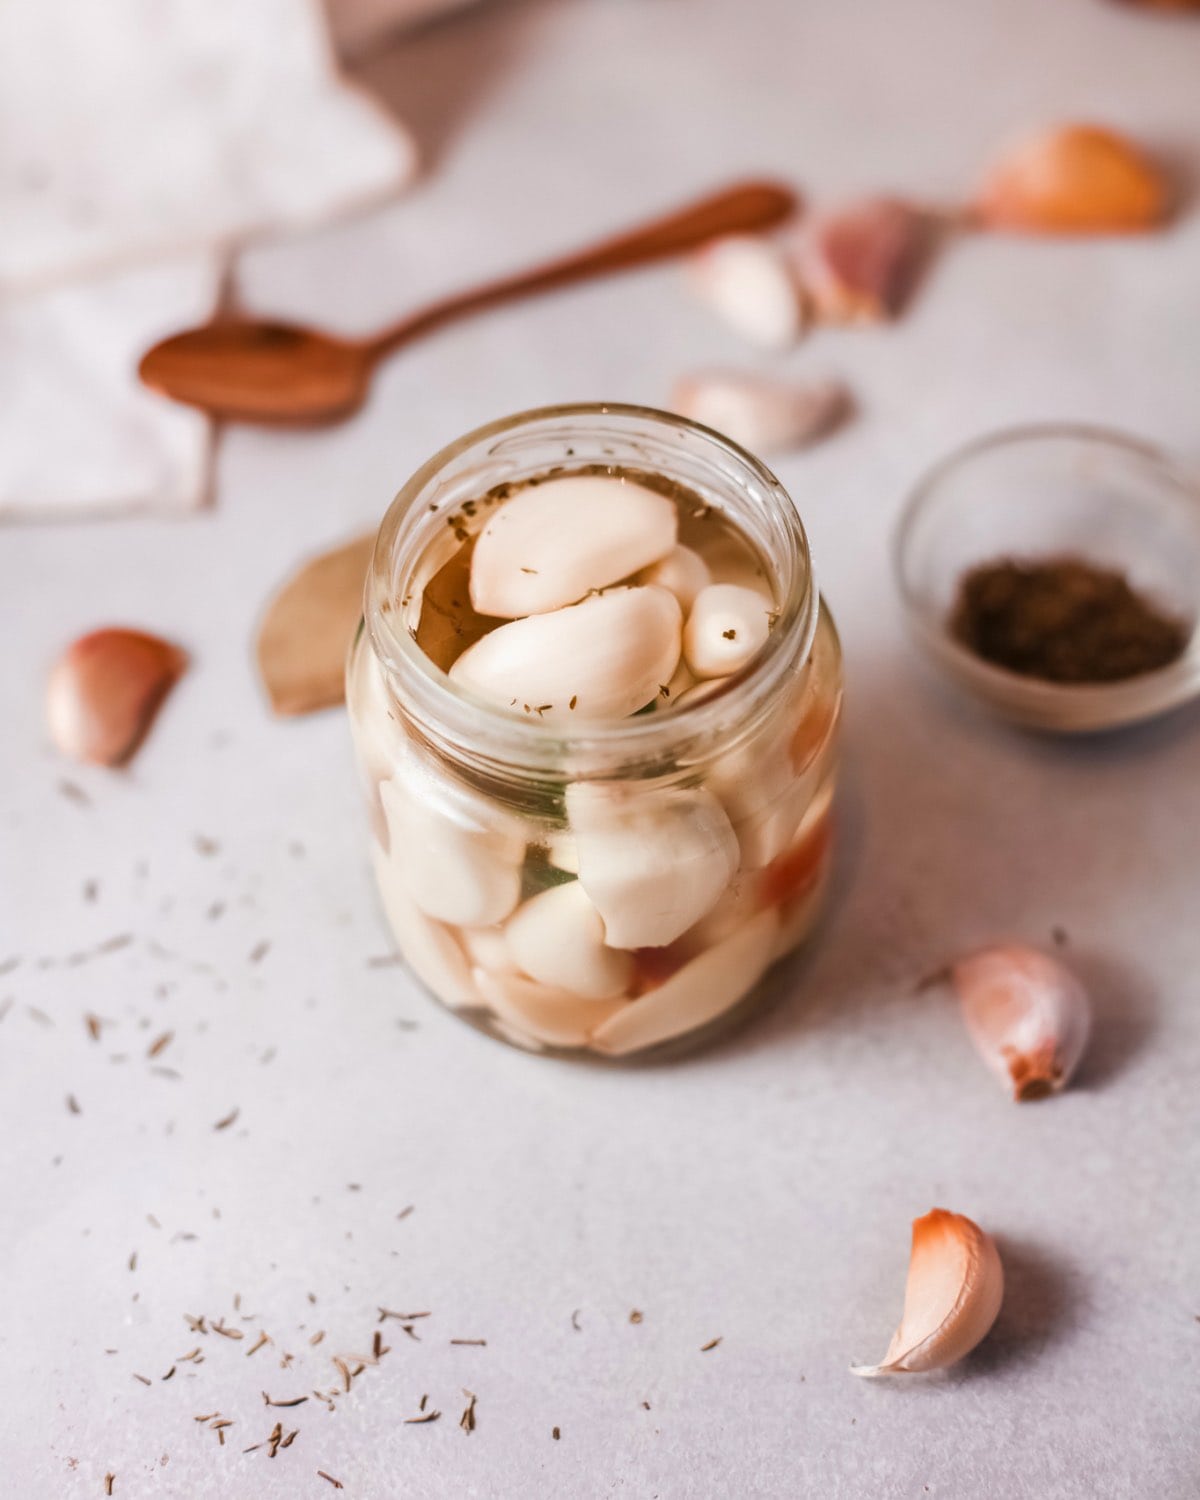 This french pickled garlic recipe is incredibly easy to make and so delicious! The perfect Mediterranean appetizer or salad topping, this mellow garlic is a mouthwatering treat.